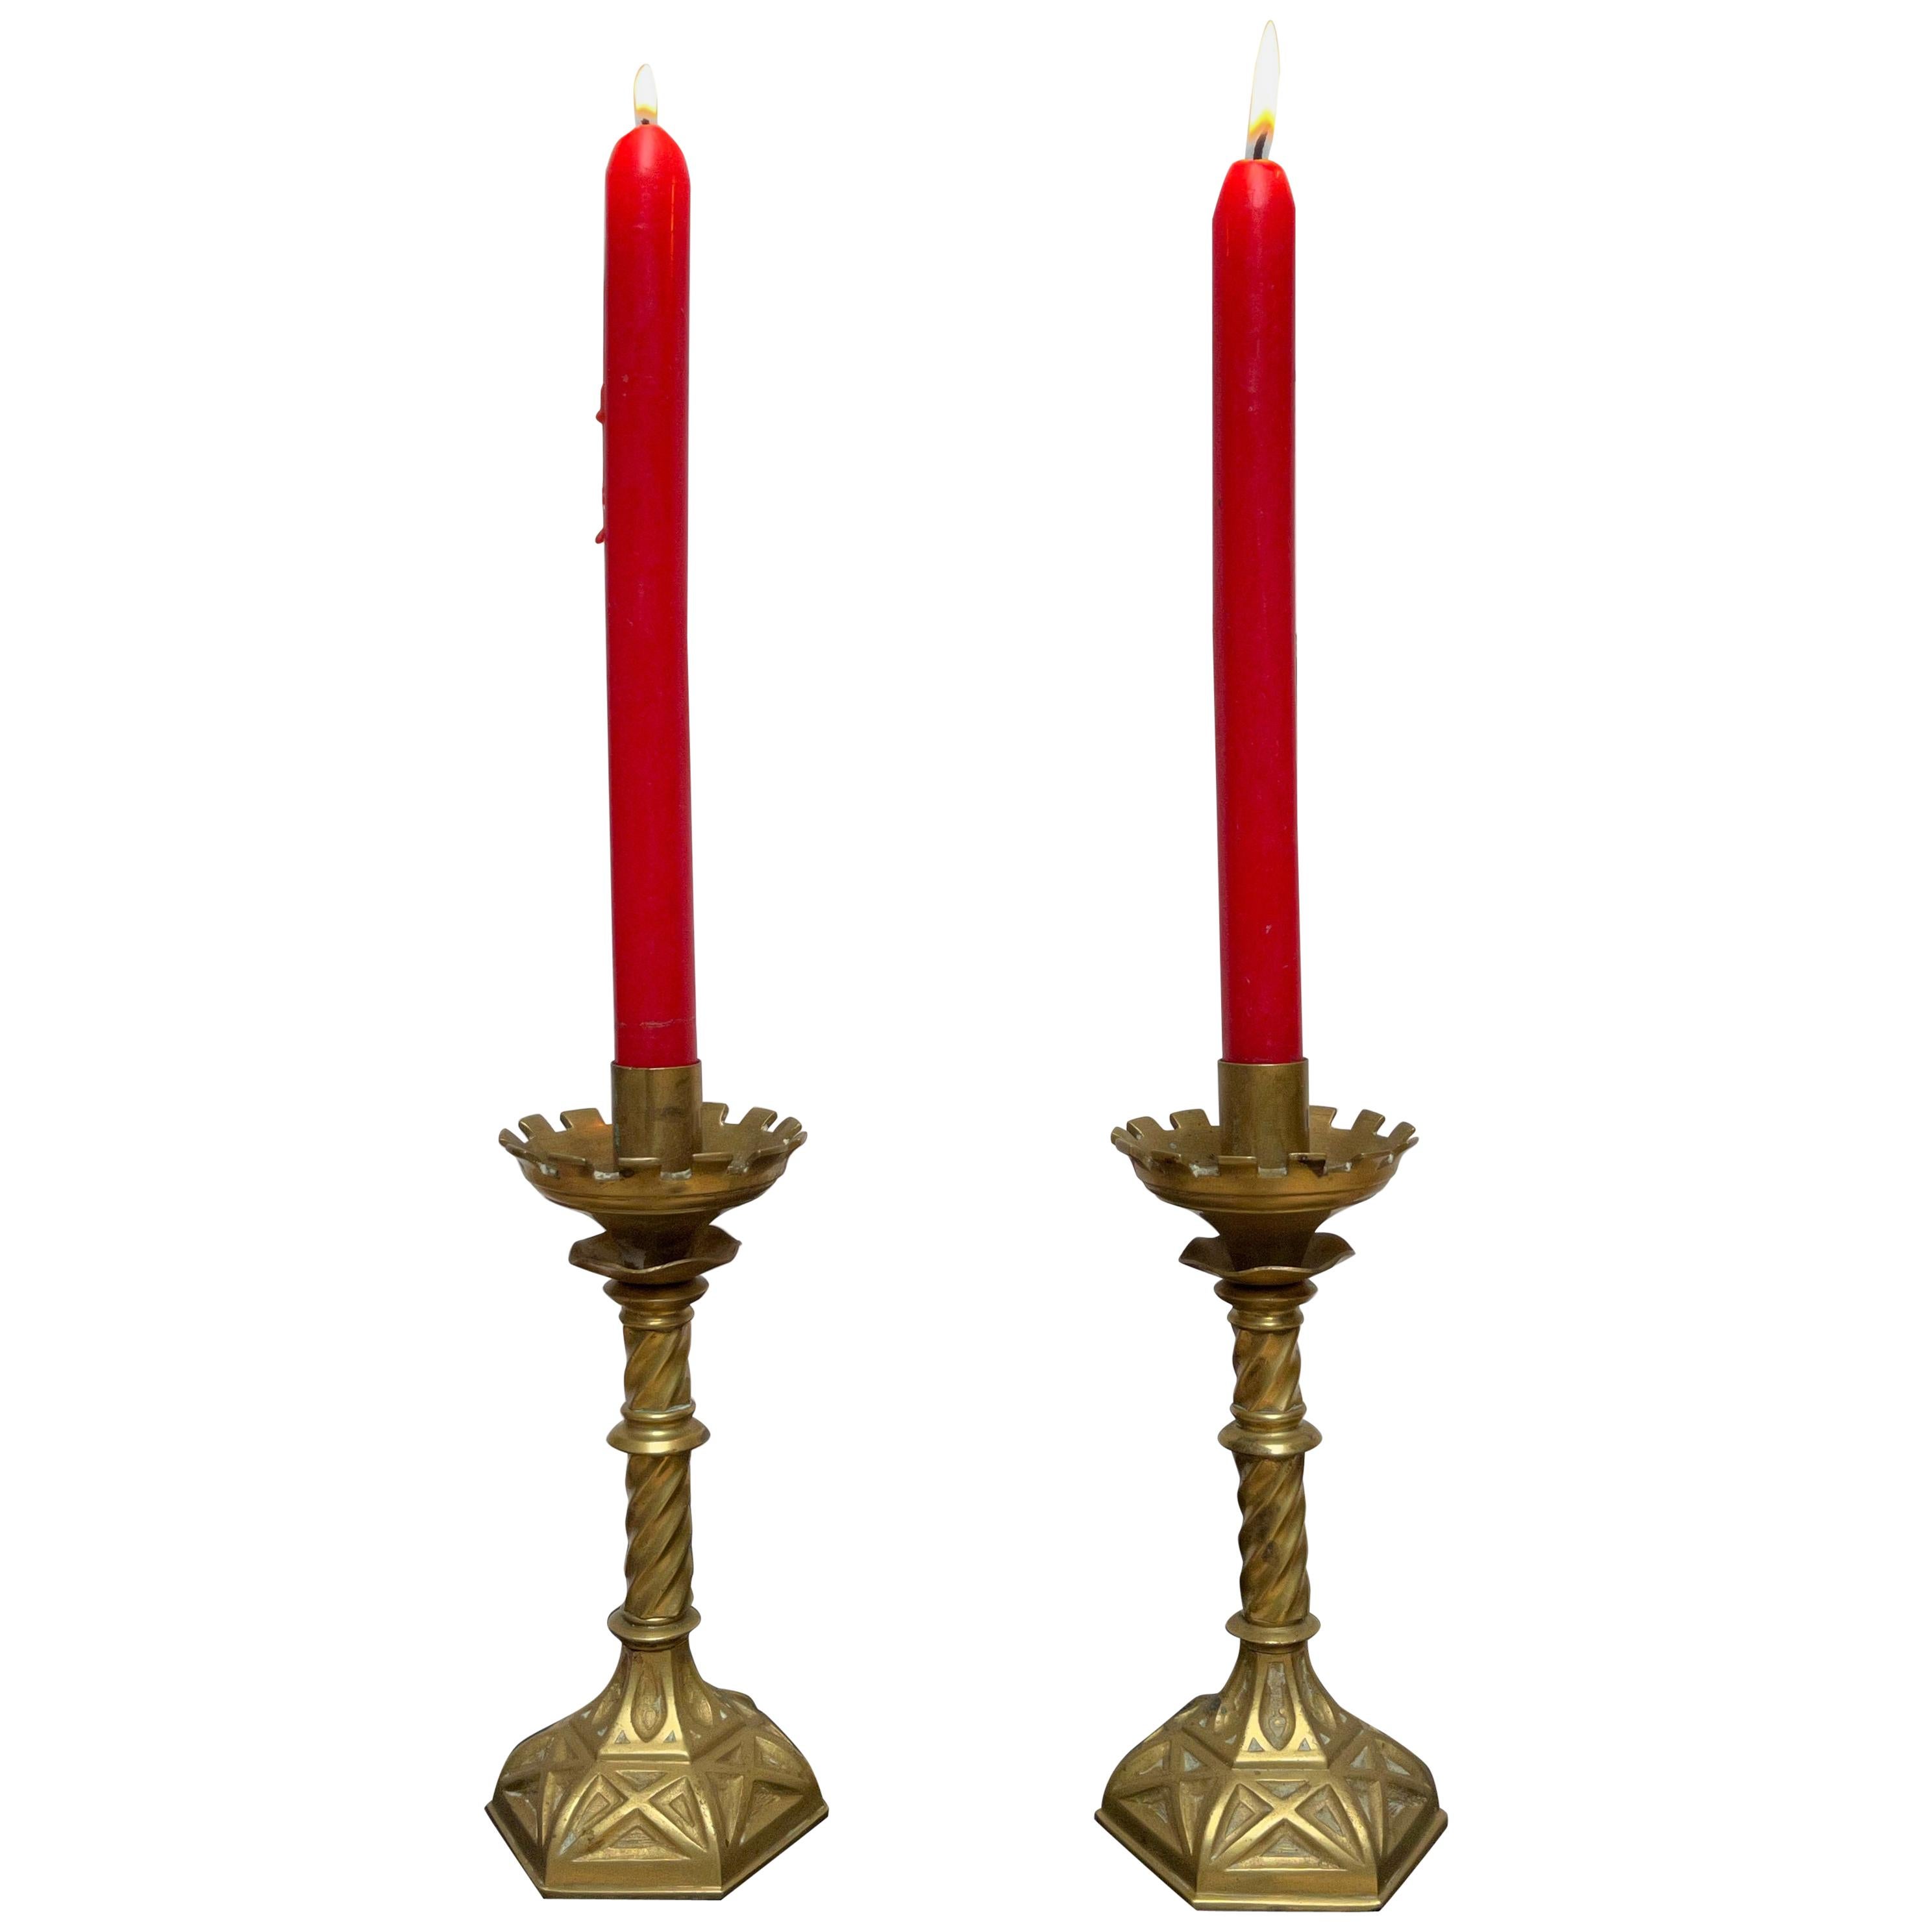 Great pair of 19th century candleholders.

If you are looking for a stylish and small pair of church candle holders to create a special atmosphere then this handcrafted pair could be perfect for you. The 'teeth' on top of this rare pair are like the